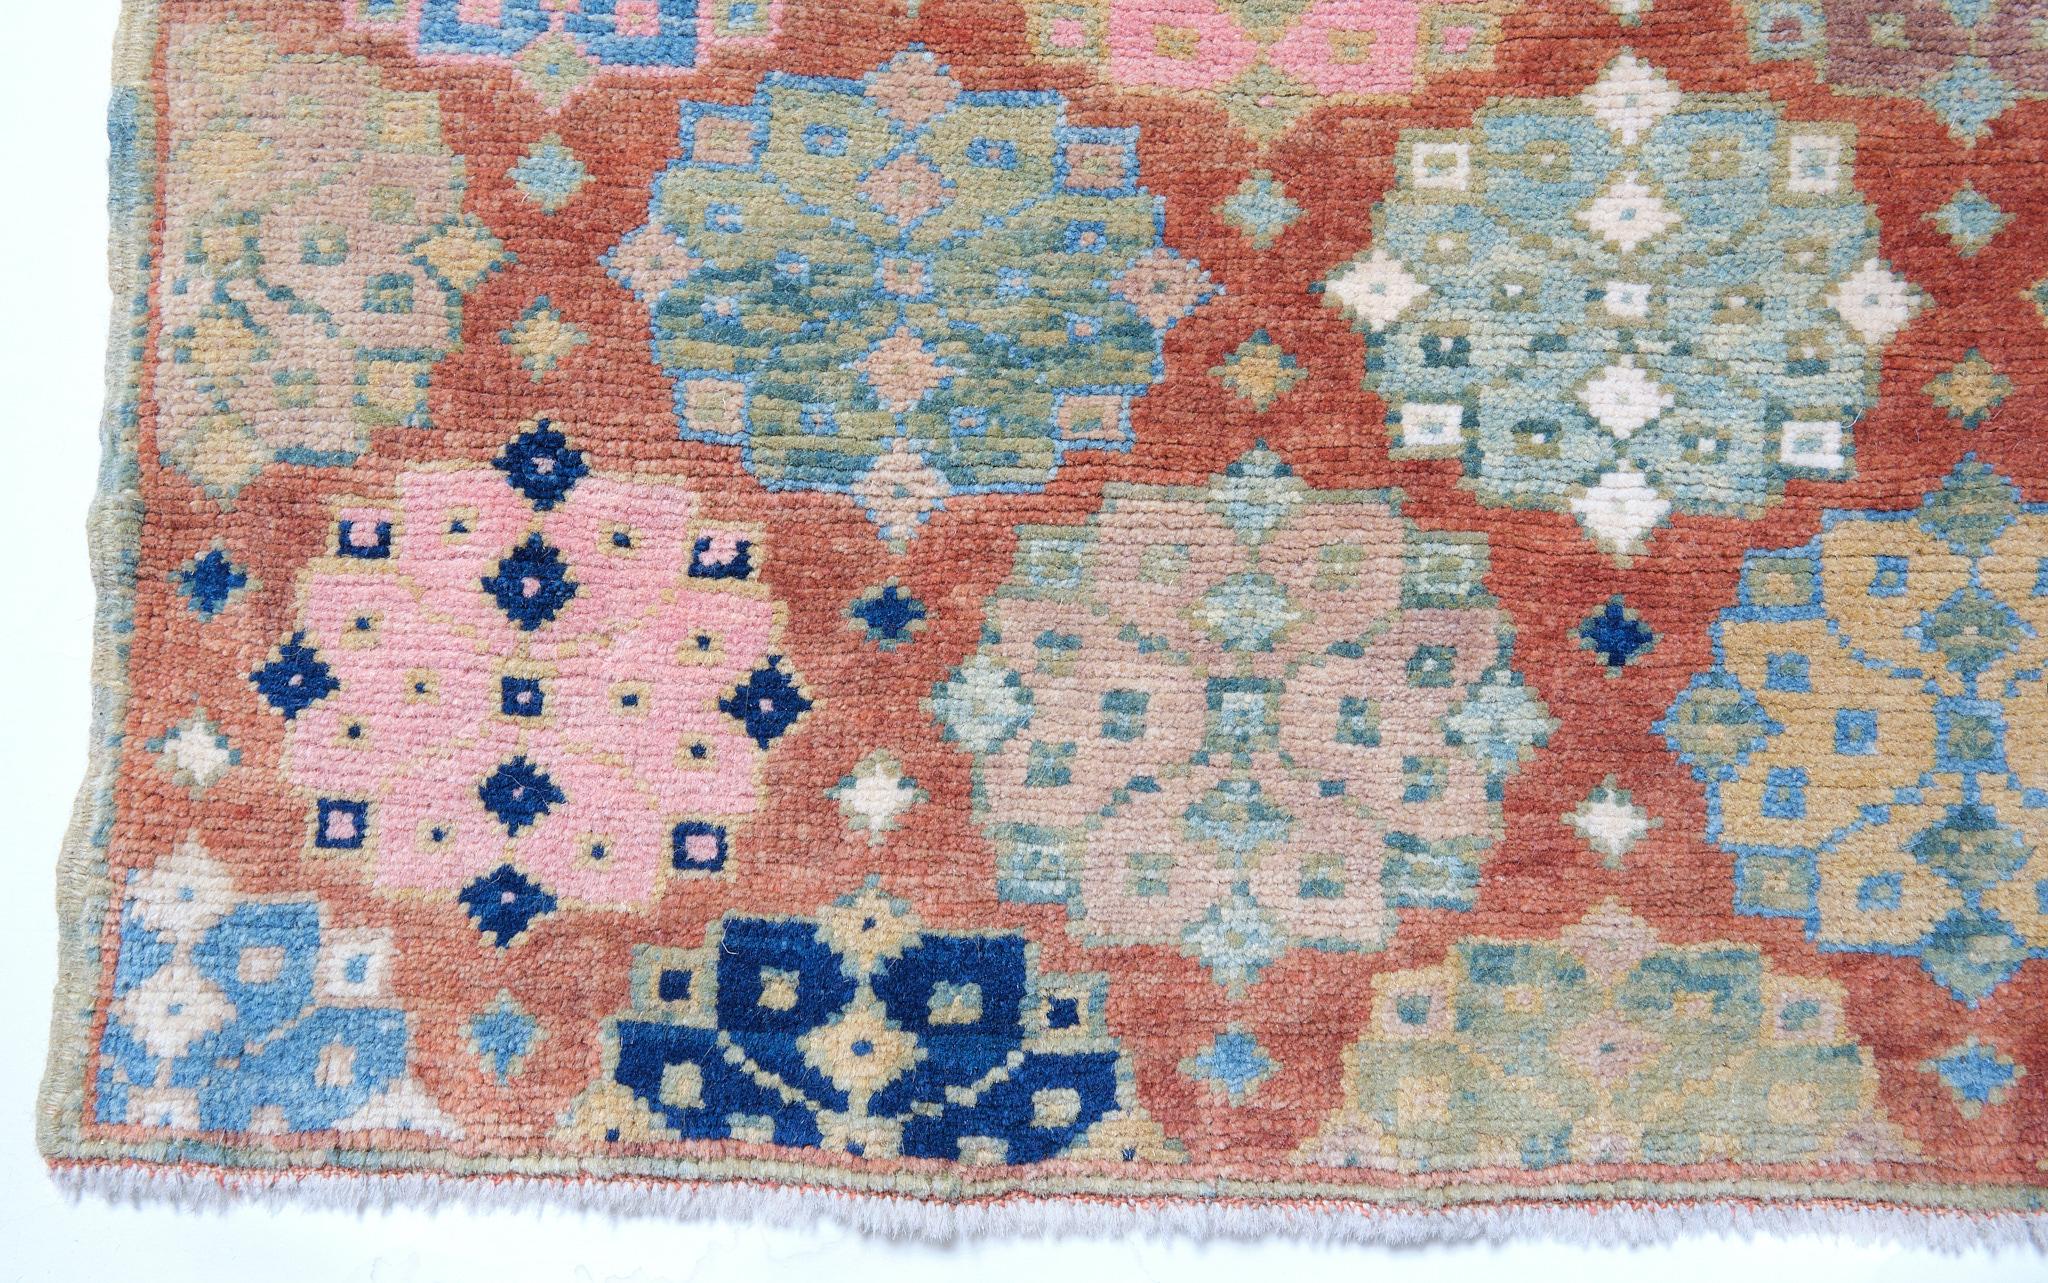 The source of the rug comes from the book Orient Star – A Carpet Collection, E. Heinrich Kirchheim, Hali Publications Ltd, 1993 nr.173. This classical shape of a rosette design 16th Century rug from the Aksaray region, Central Anatolia area, Turkey.